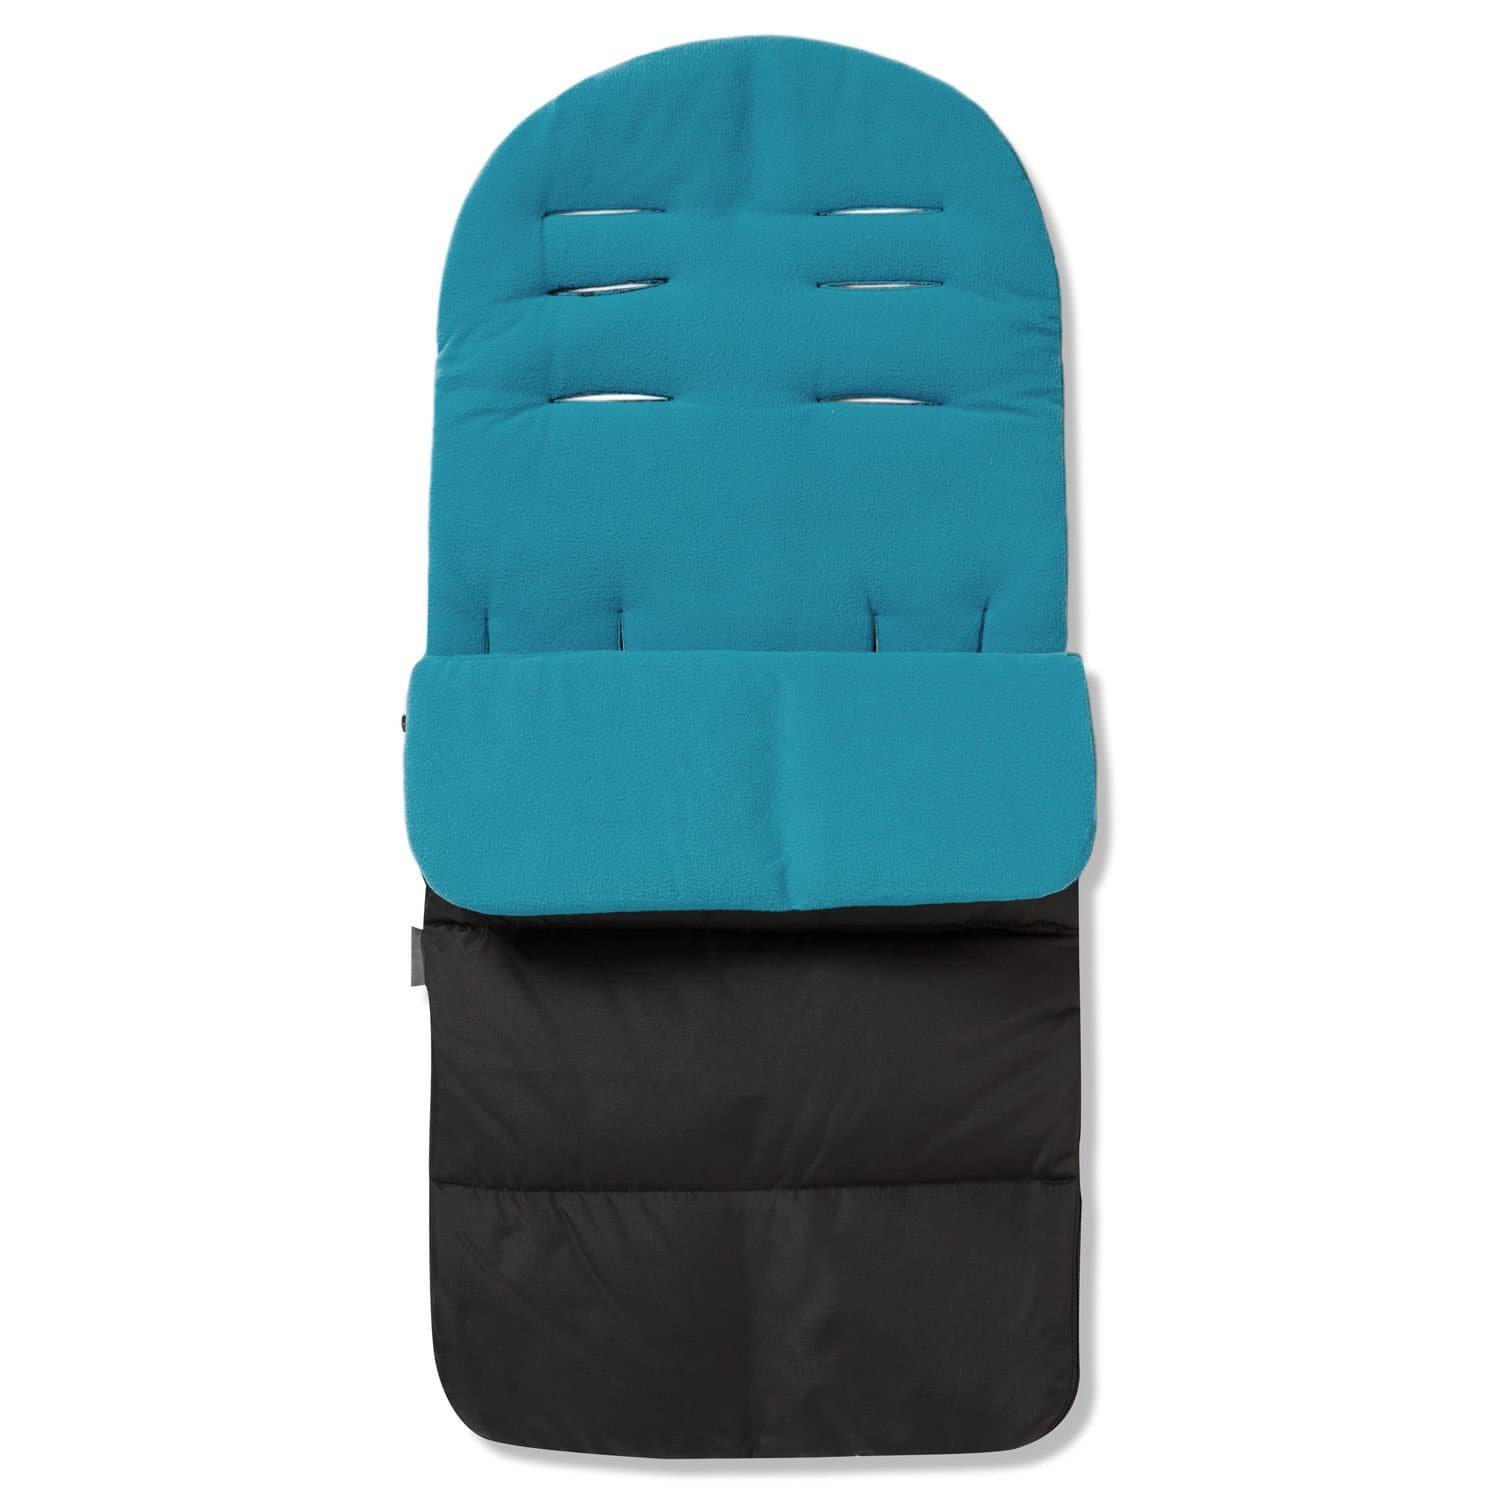 Premium Footmuff / Cosy Toes Compatible with Cybex - Ocean Blue / Fits All Models | For Your Little One